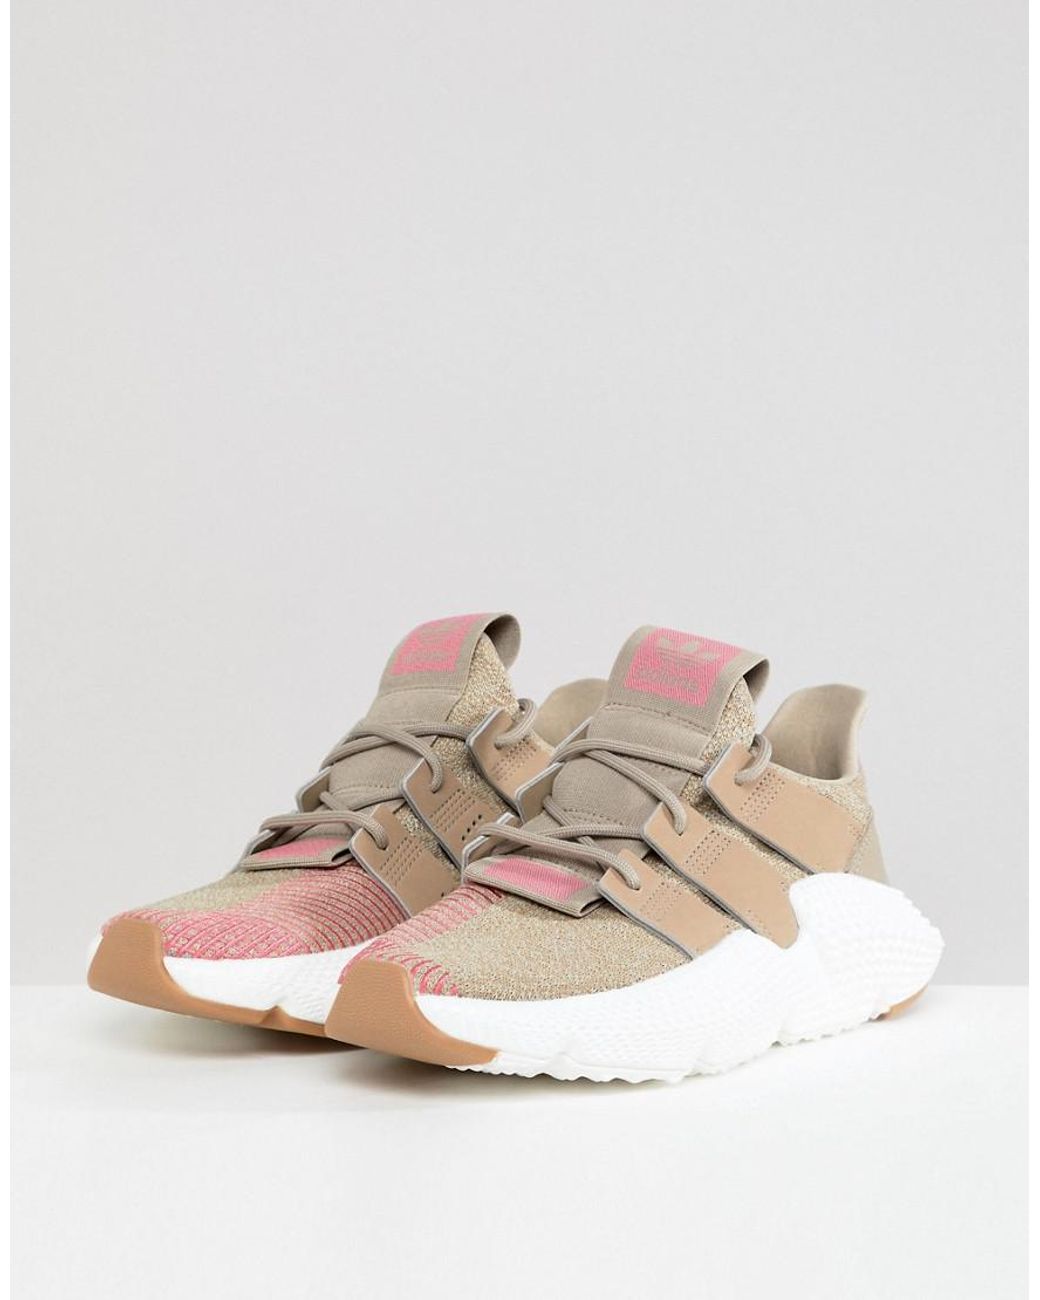 adidas Originals Prophere In Beige And Pink in Natural |